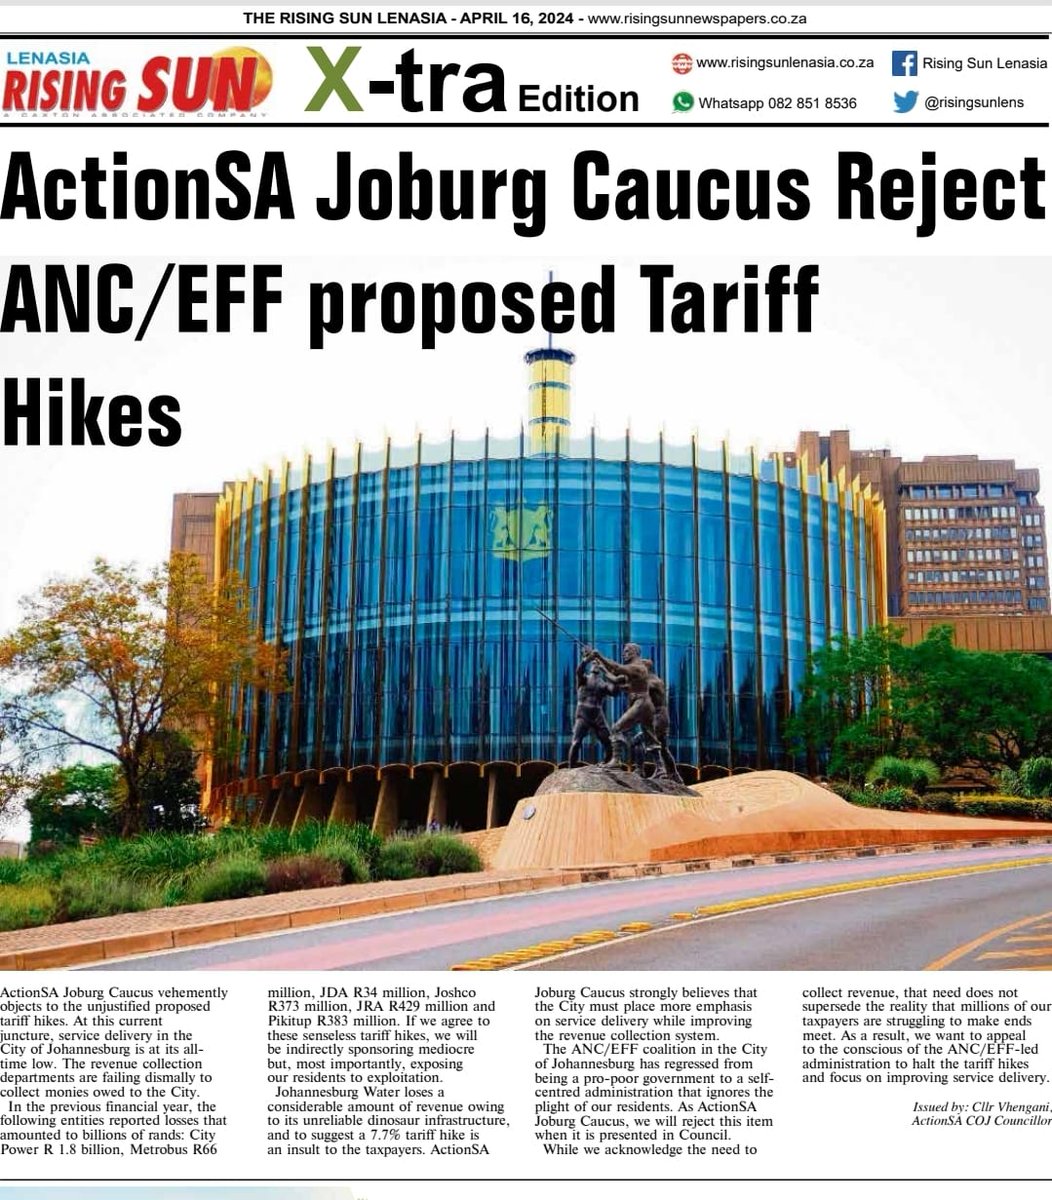 With service delivery in the CoJ at an all-time low, ActionSA caucus rejects these unjustifiable and unreasonable tariff hikes proposed by the ANC/EFF/PA coalition. This is tantamount to exploiting residents of the City who are hardly receiving the basic services. Residents first